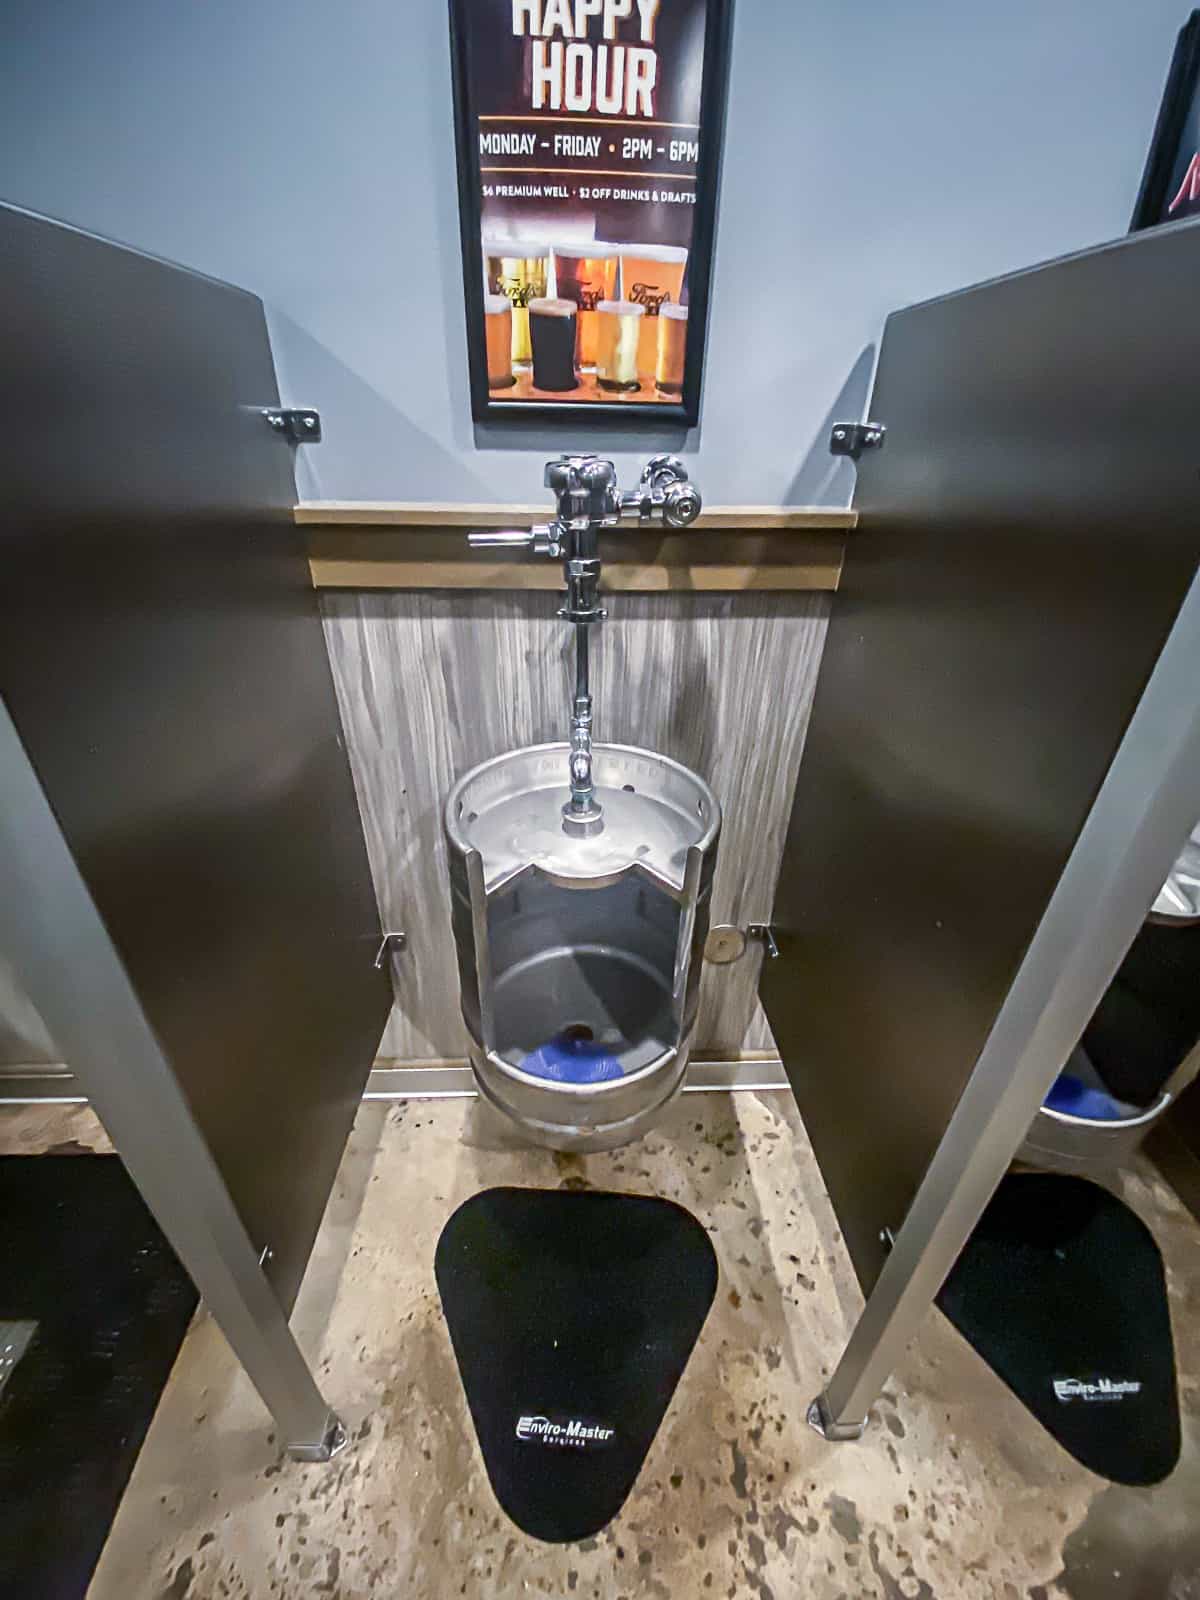 Bathroom urinal at Fords Garage in Plano Texas